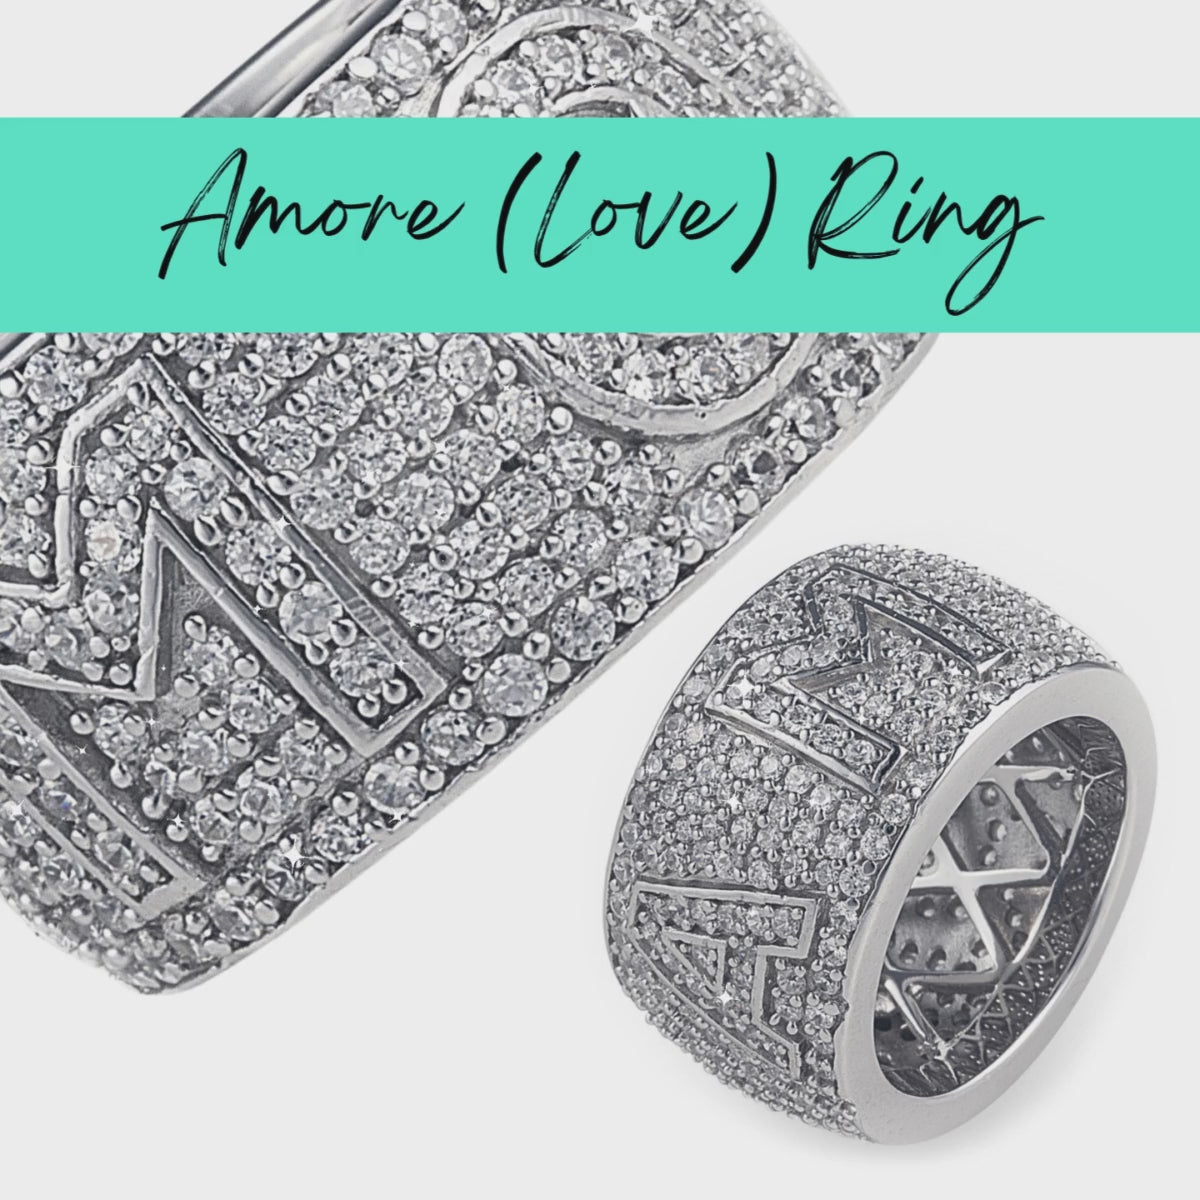 Amore (Love) Ring in 925 sterling silver with cubic zirconia stones in a pavé setting and the word "Amore" (LOVE) scrolled around the ring. Bridal ring, Unisex Ring. Shop rings & affordable luxury jewellery by Bellagio & Co. Worldwide shipping from Australia.